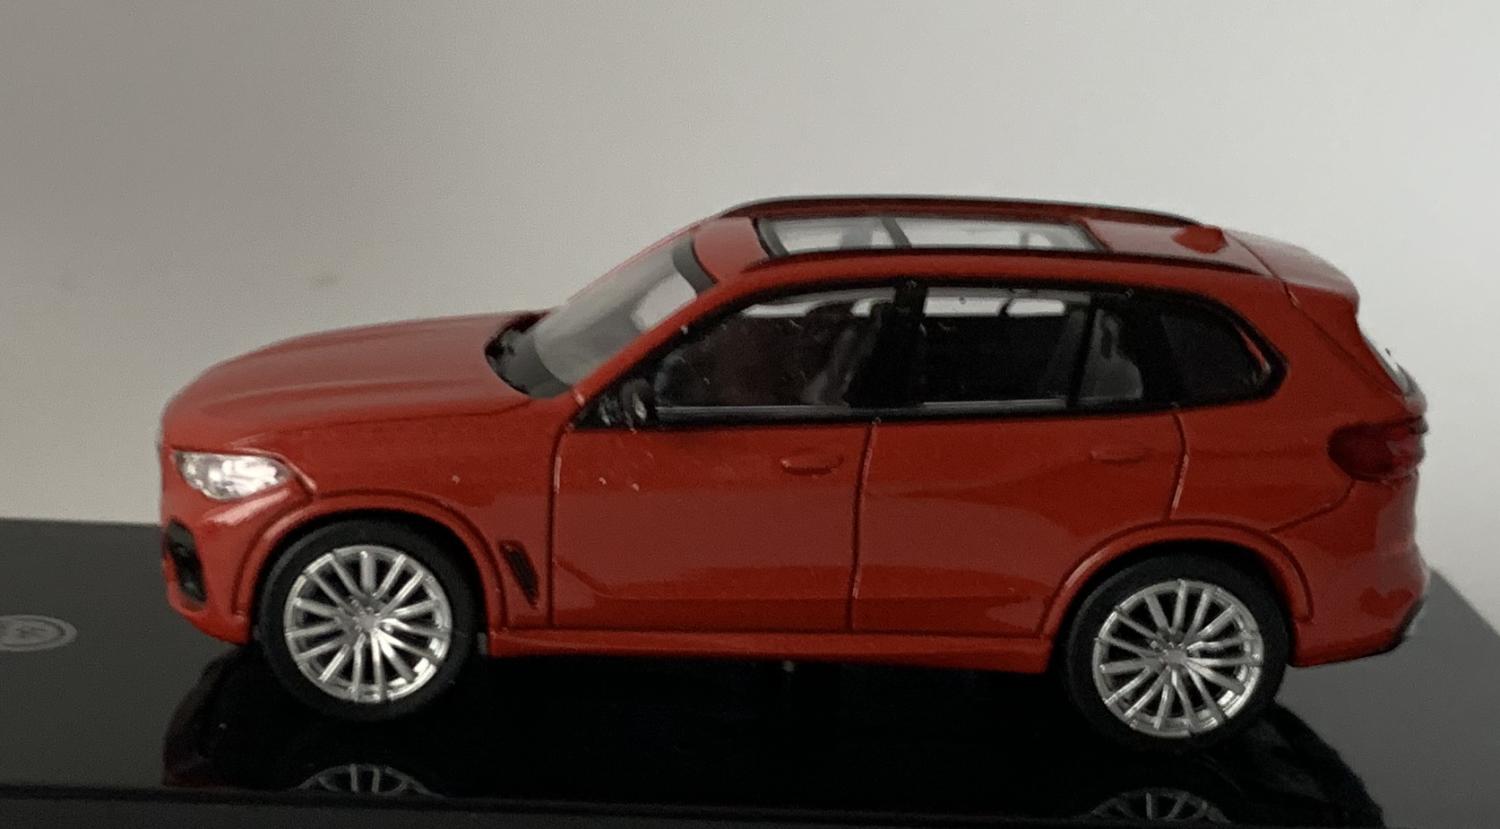 BMW X5 in toronto red 1:64 scale model from Paragon Models